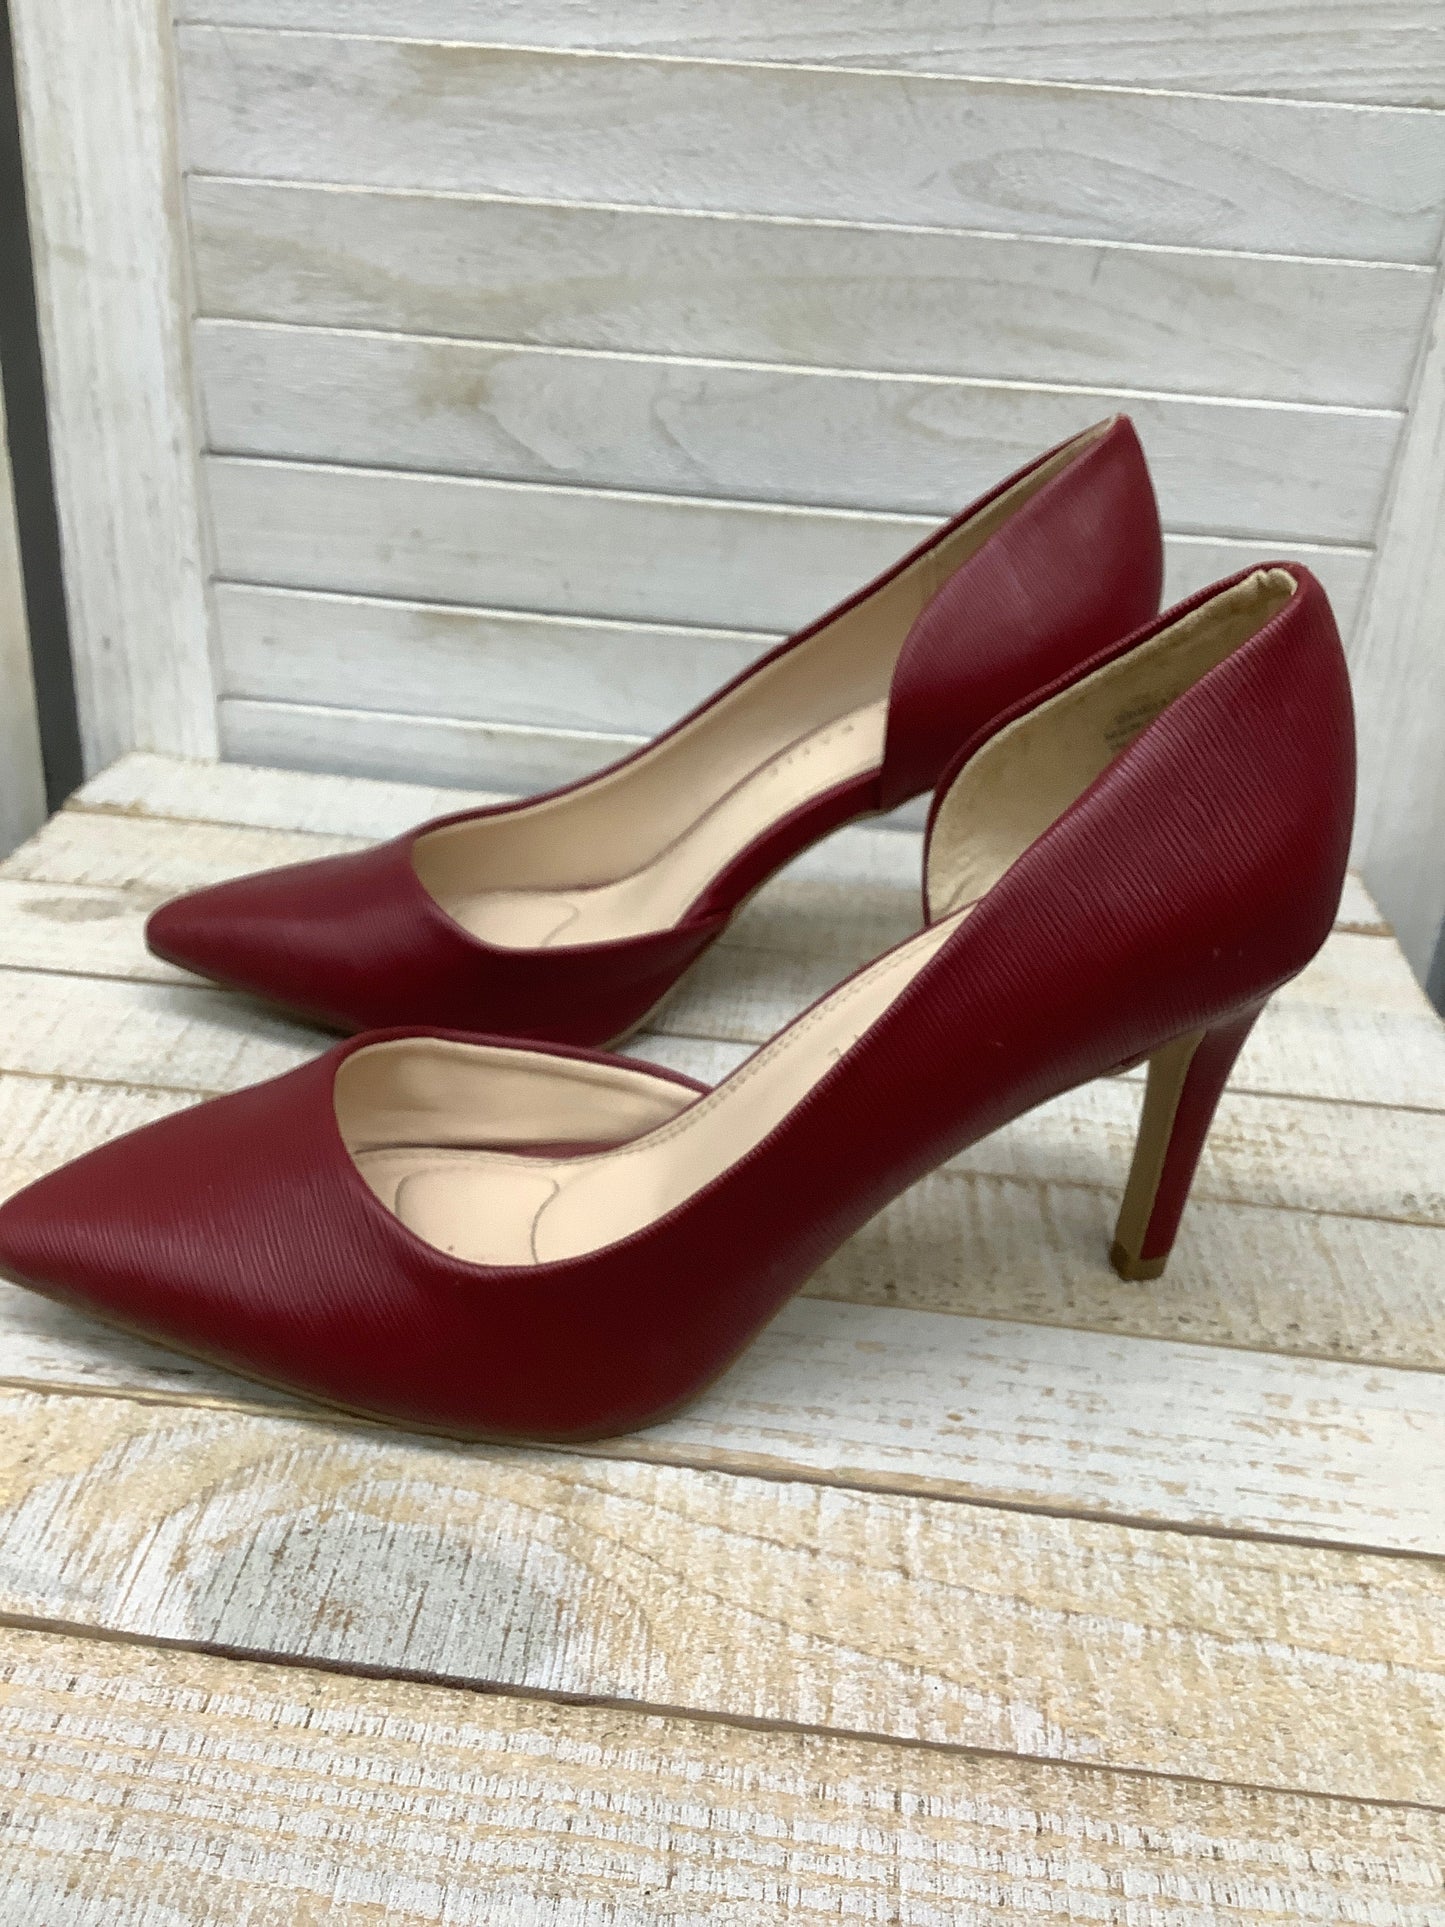 Shoes Heels Stiletto By Kelly And Katie  Size: 8